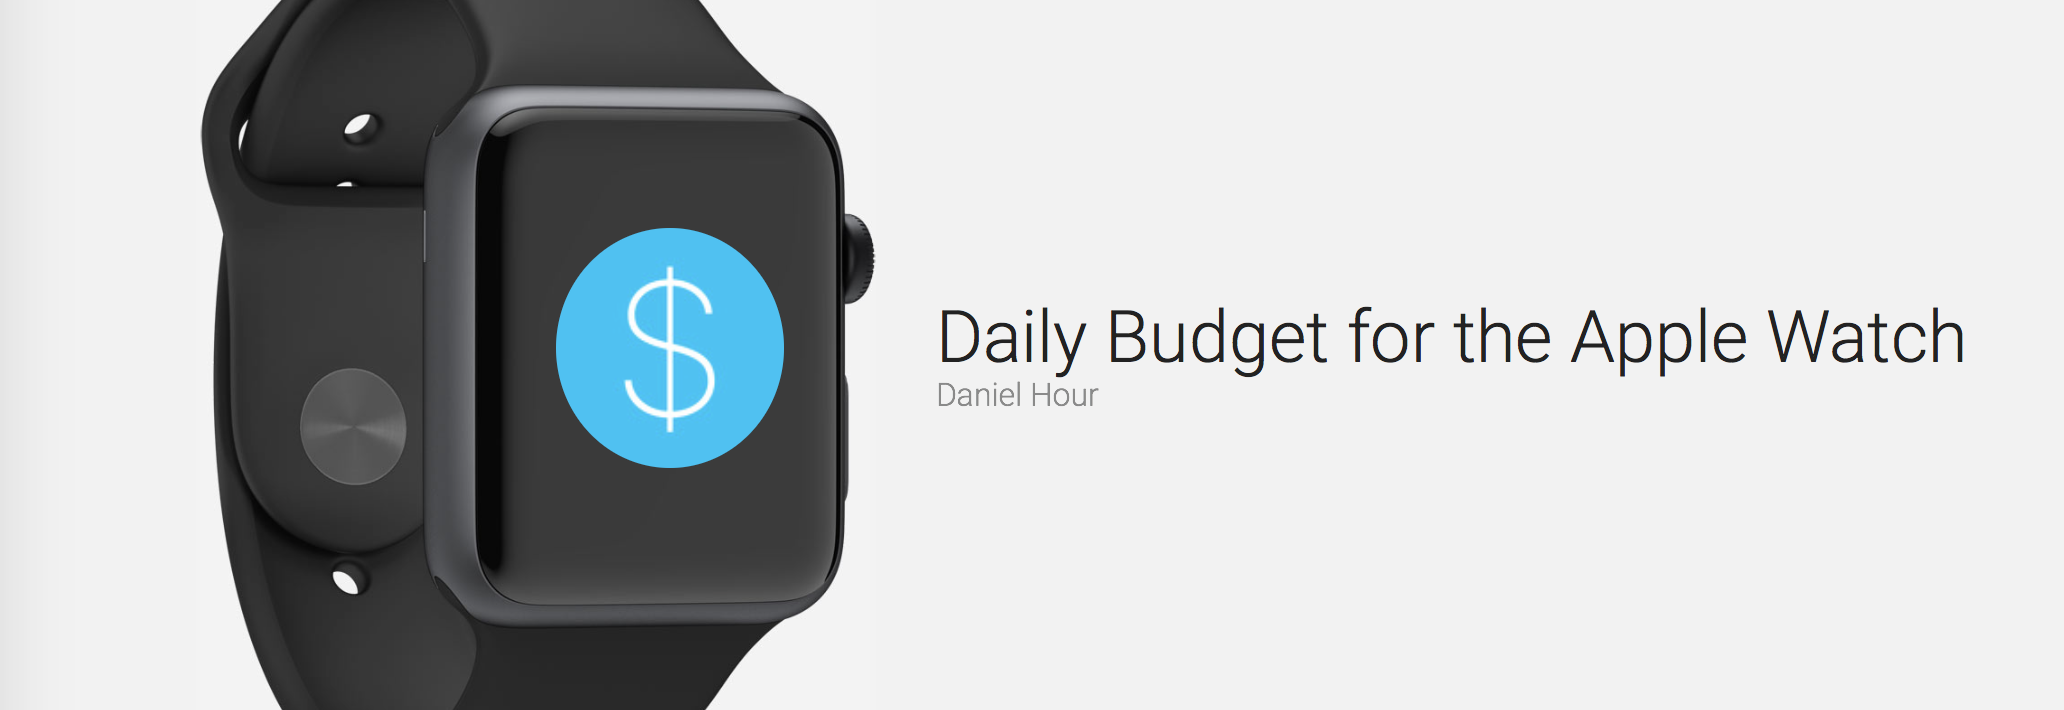 Keep track of your personal budget with Daily Budget for Apple Watch